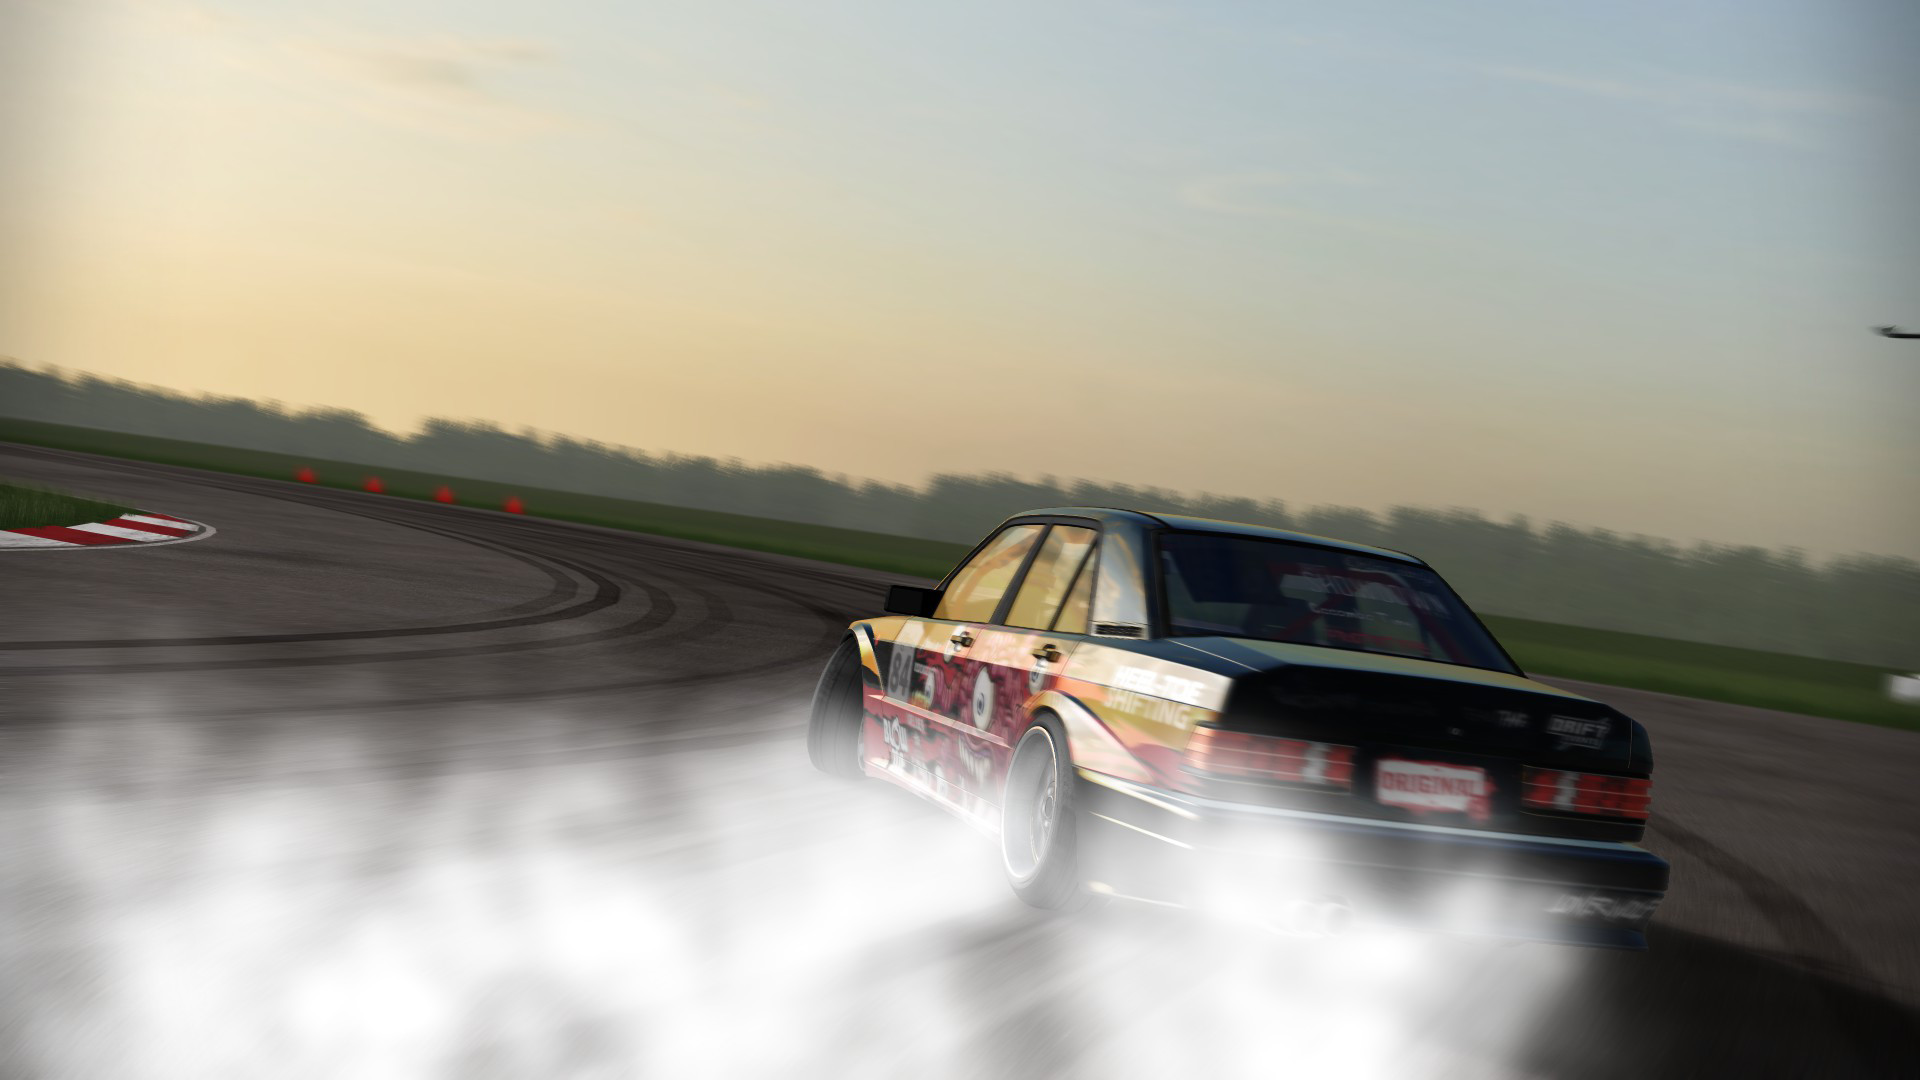 RDS - The Official Drift Videogame Free Download